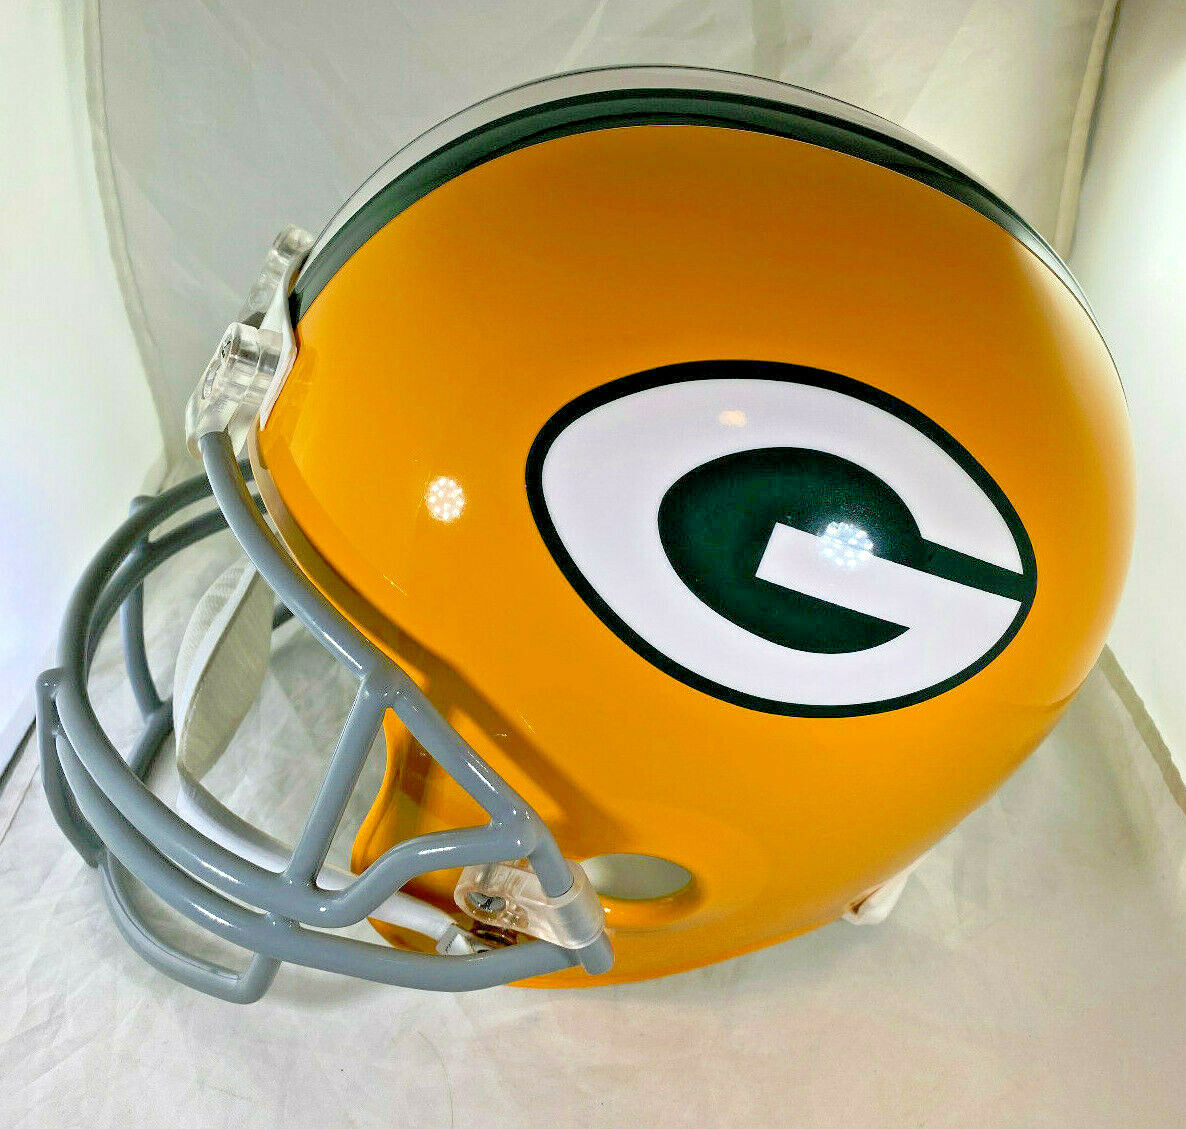 Bart Starr / Autographed Green Bay Packers Full Size Throwback Helmet / Steiner